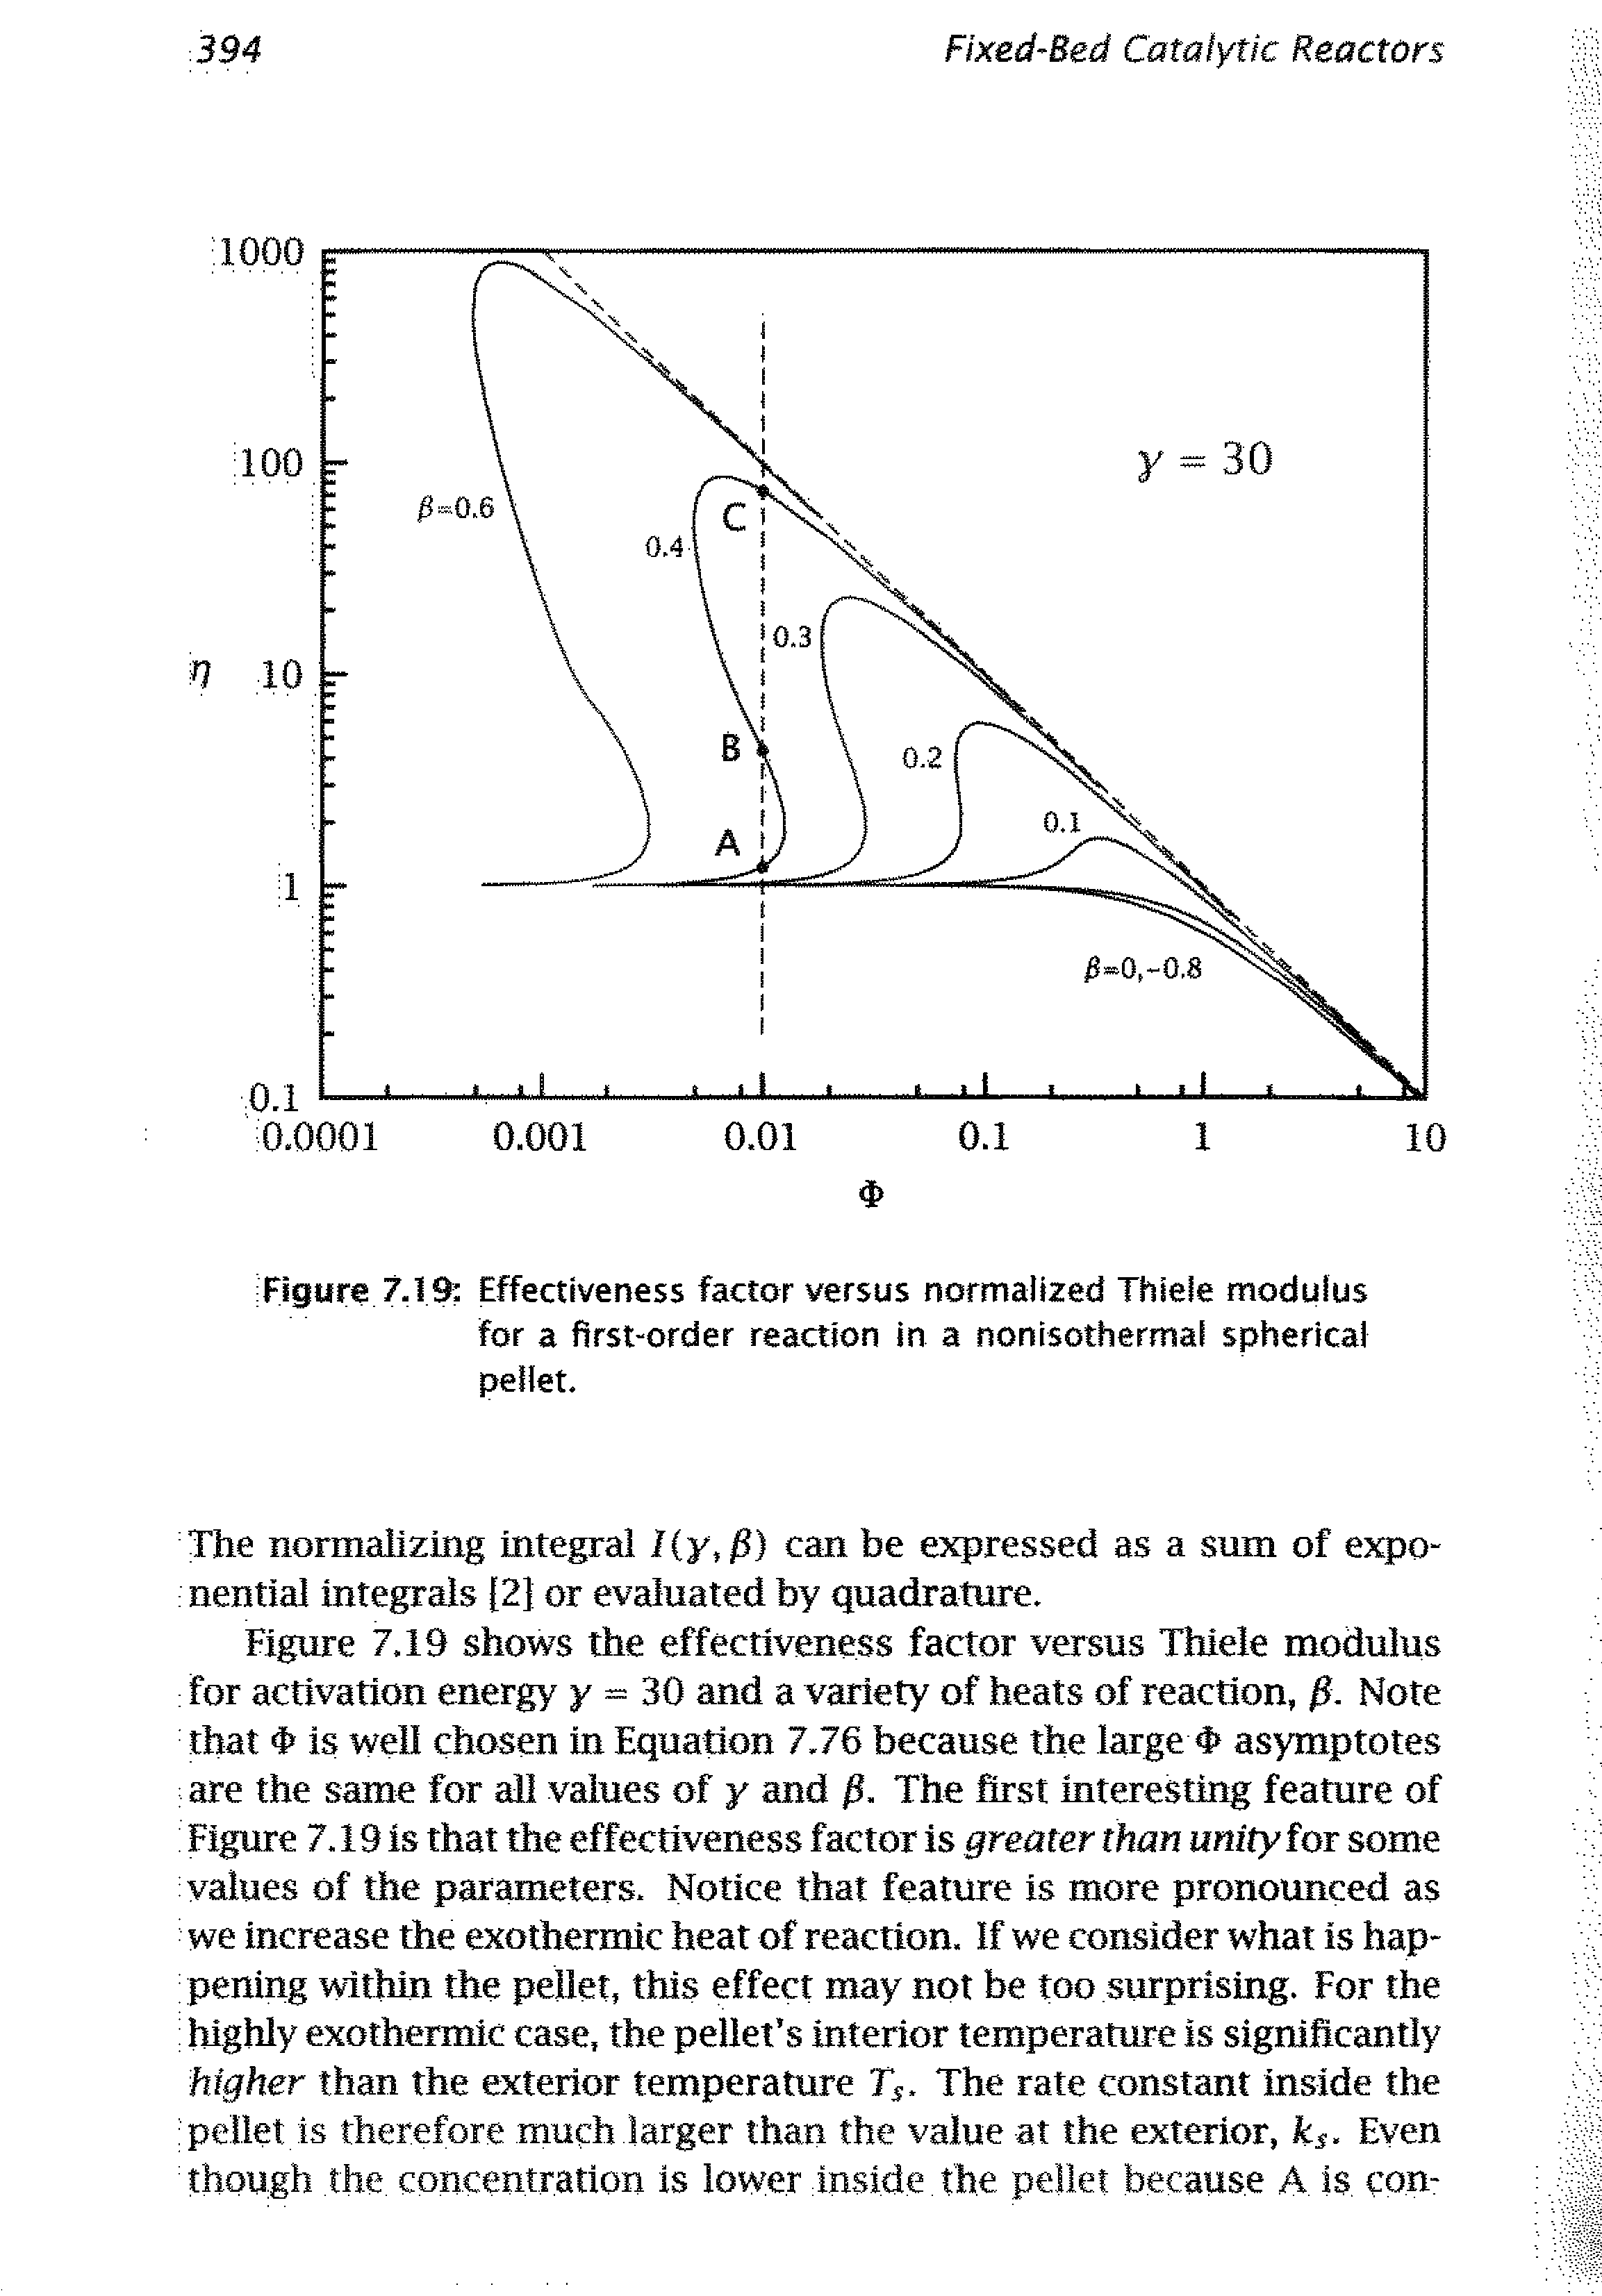 Figure 7.19 Effectiveness factor versus normalized Thiele modulus for a first-order reaction in a non isothermal spherical pellet.